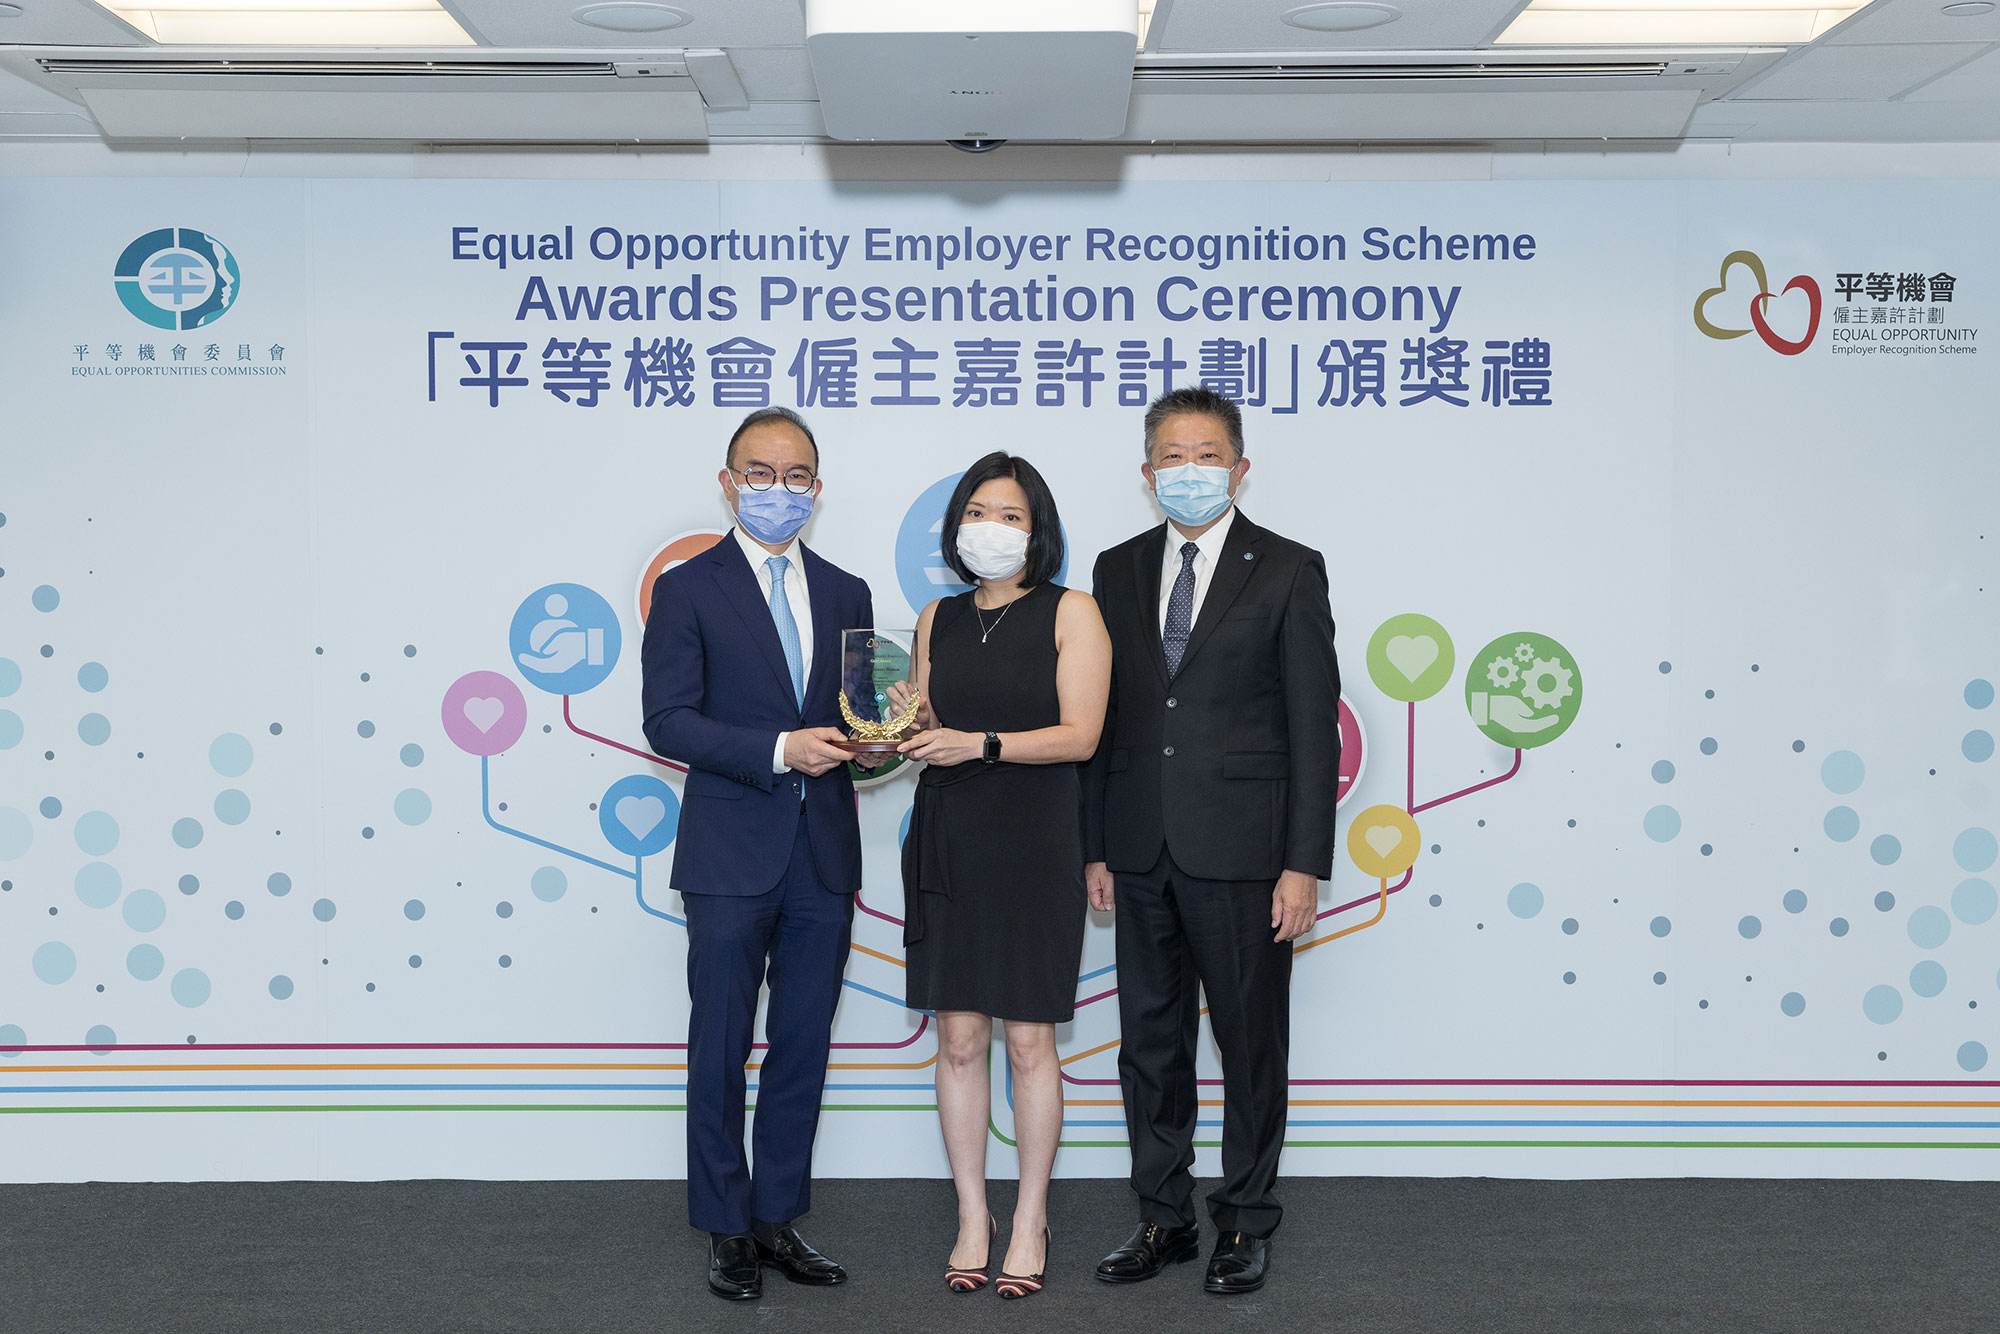 Mr Erick TSANG Kwok-wai, IDSM, JP, Secretary for Constitutional and Mainland Affairs (left) and Mr Ricky CHU Man-kin, IDS, Chairperson of the Equal Opportunities Commission (right), present the trophy to the representative of Willis Towers Watson (centre), winner of the Gold Award of the Equal Opportunity Employer Recognition Scheme.